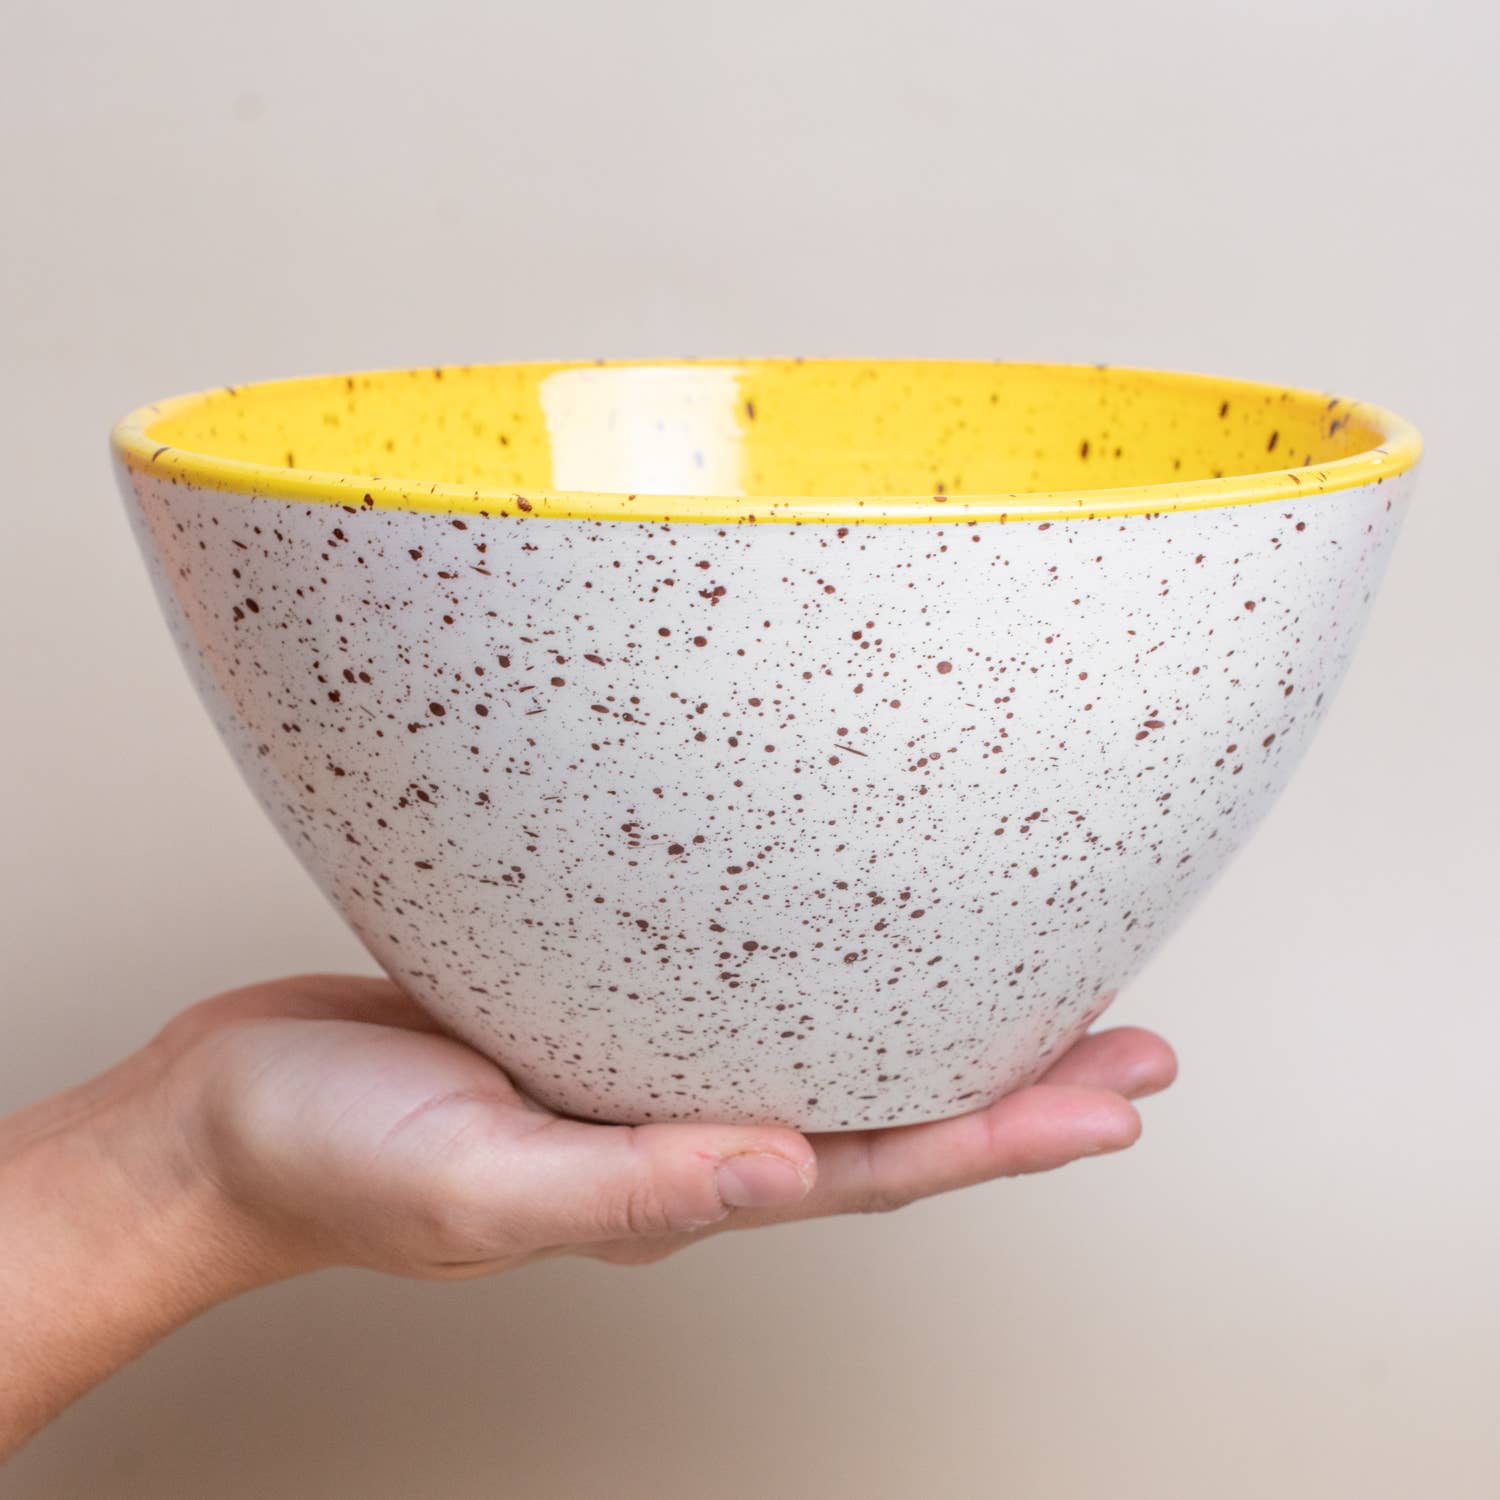 Yellow bowl held in the palm of a hand